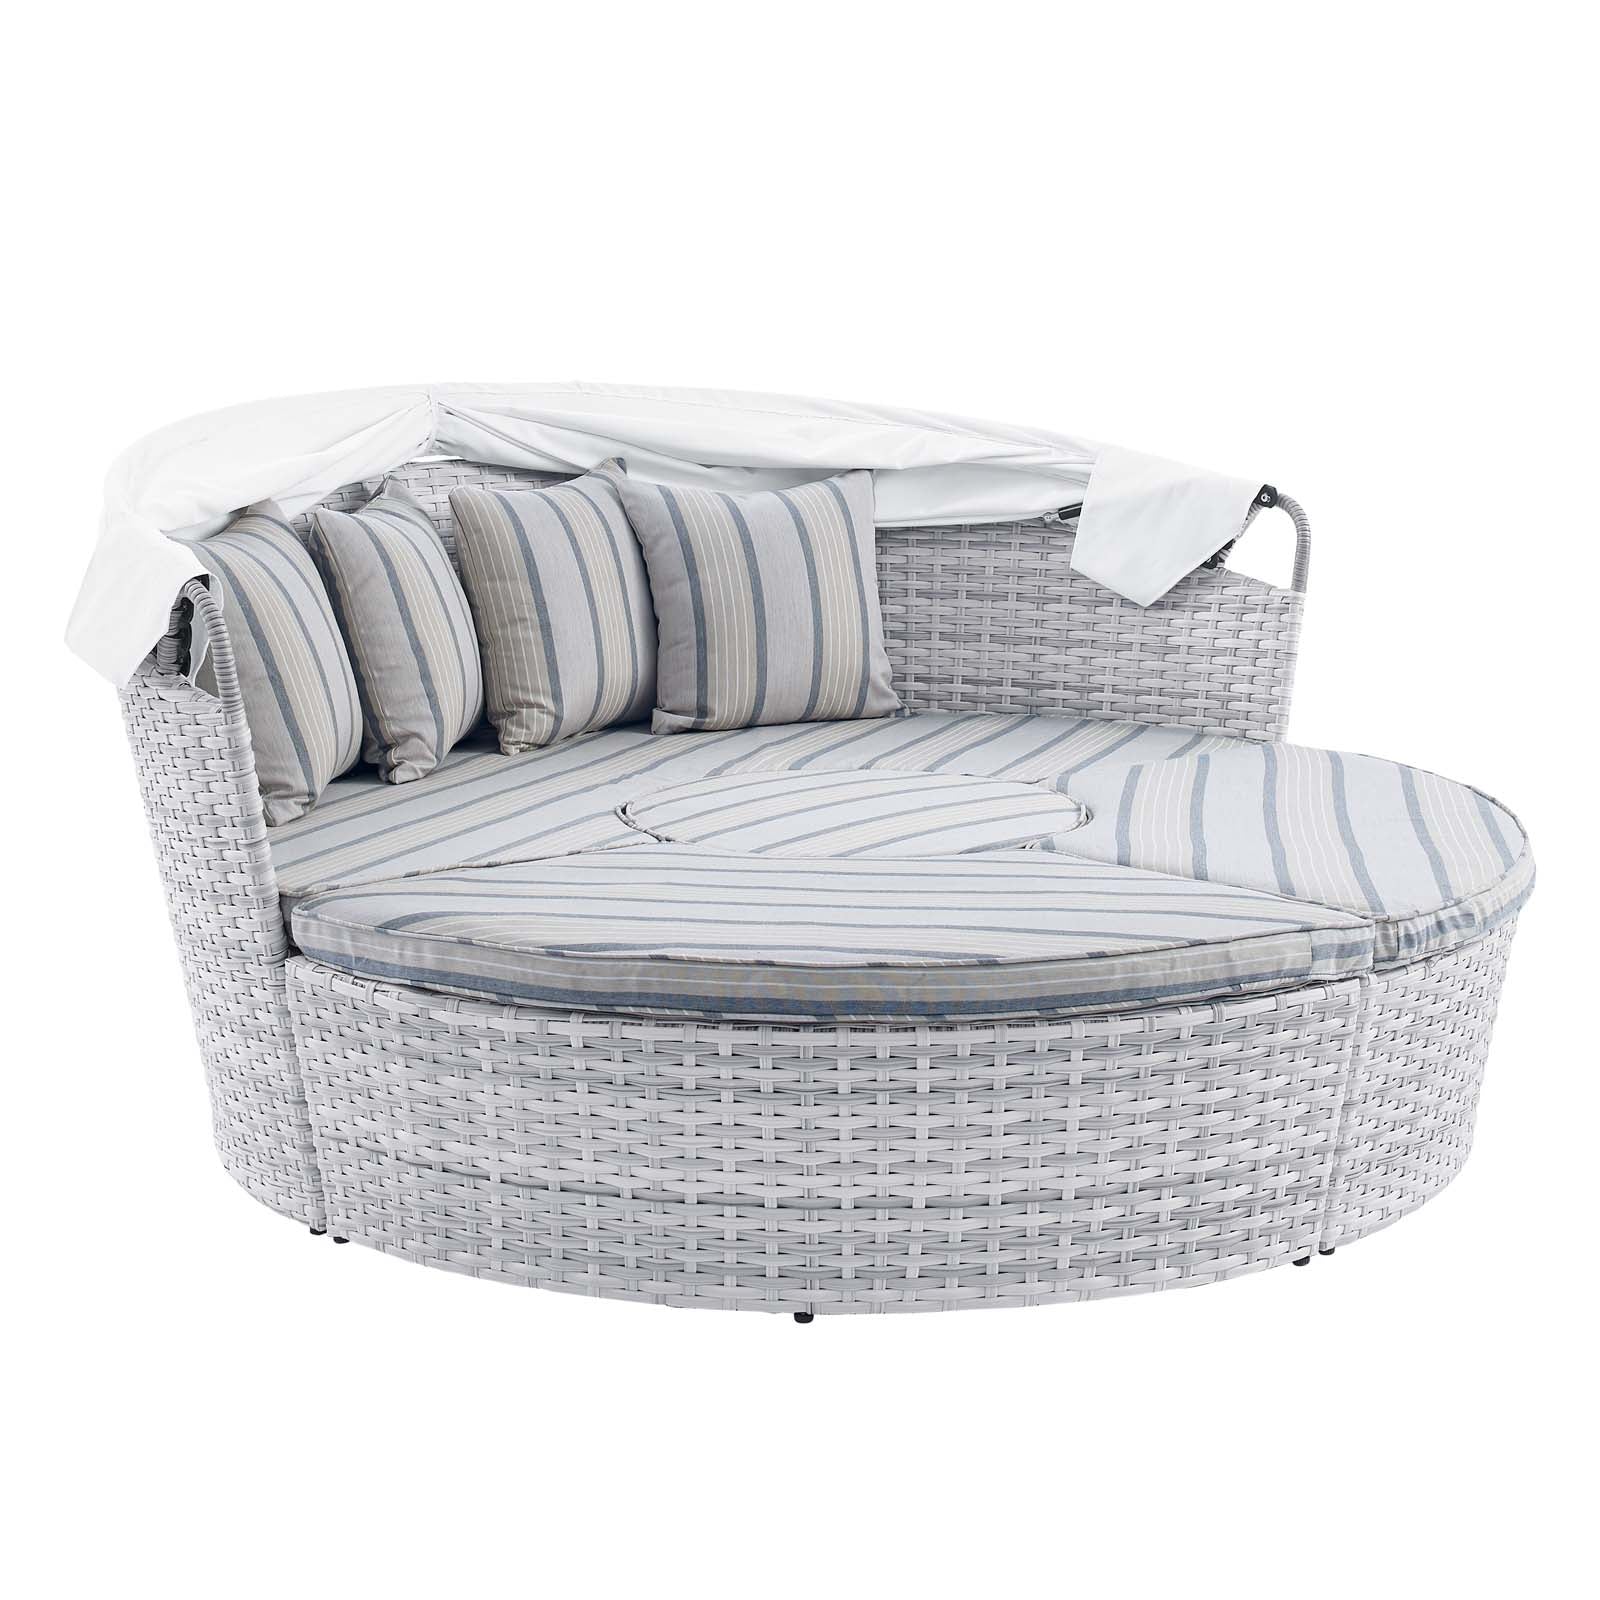 Modway Patio Daybeds - Scottsdale Canopy Sunbrella Outdoor Patio Daybed Light Gray Pebble